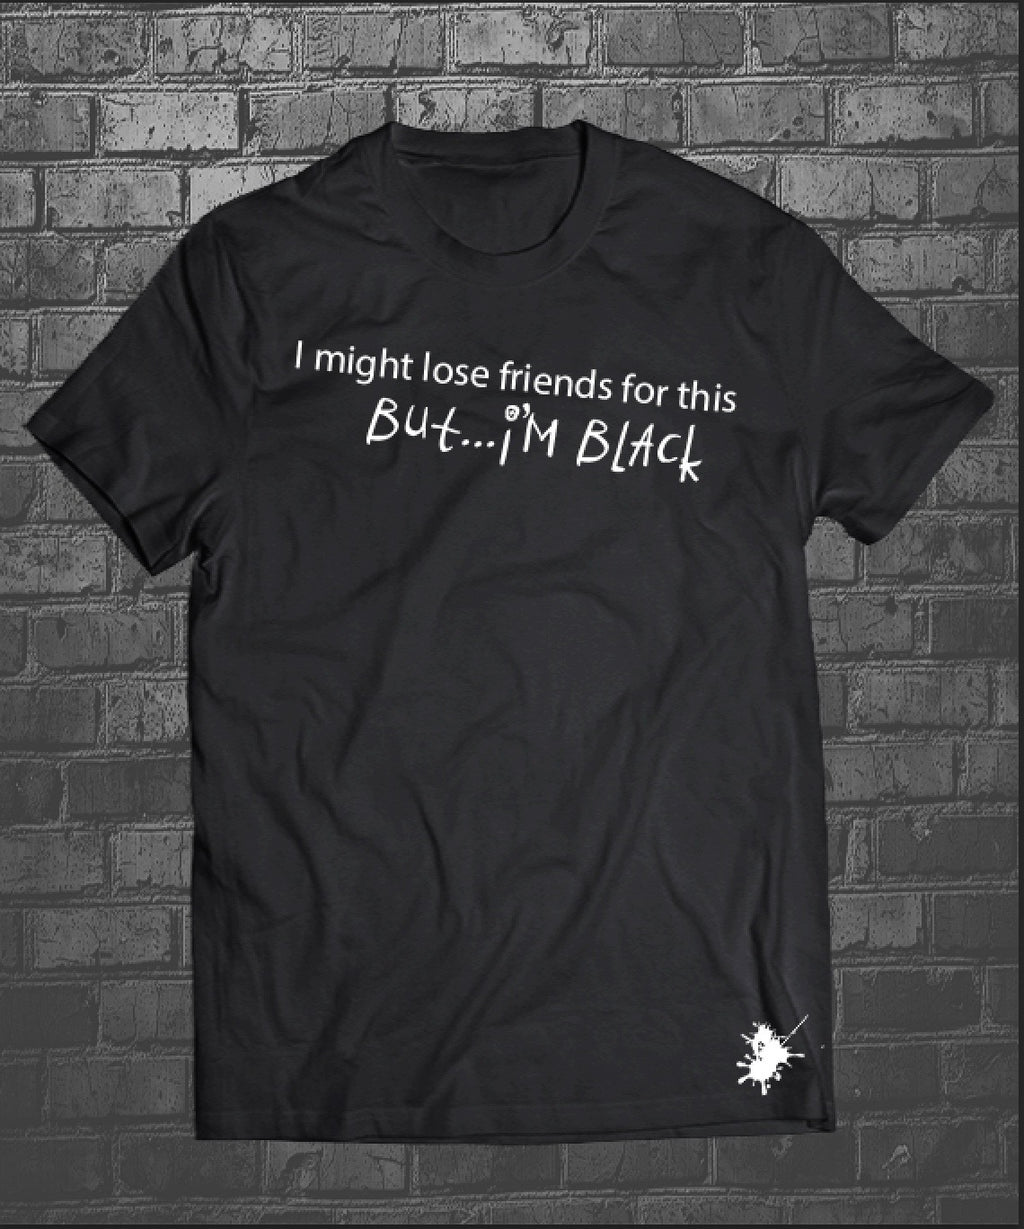 I Might Lose Friends This....But I'm Black T-Shirt